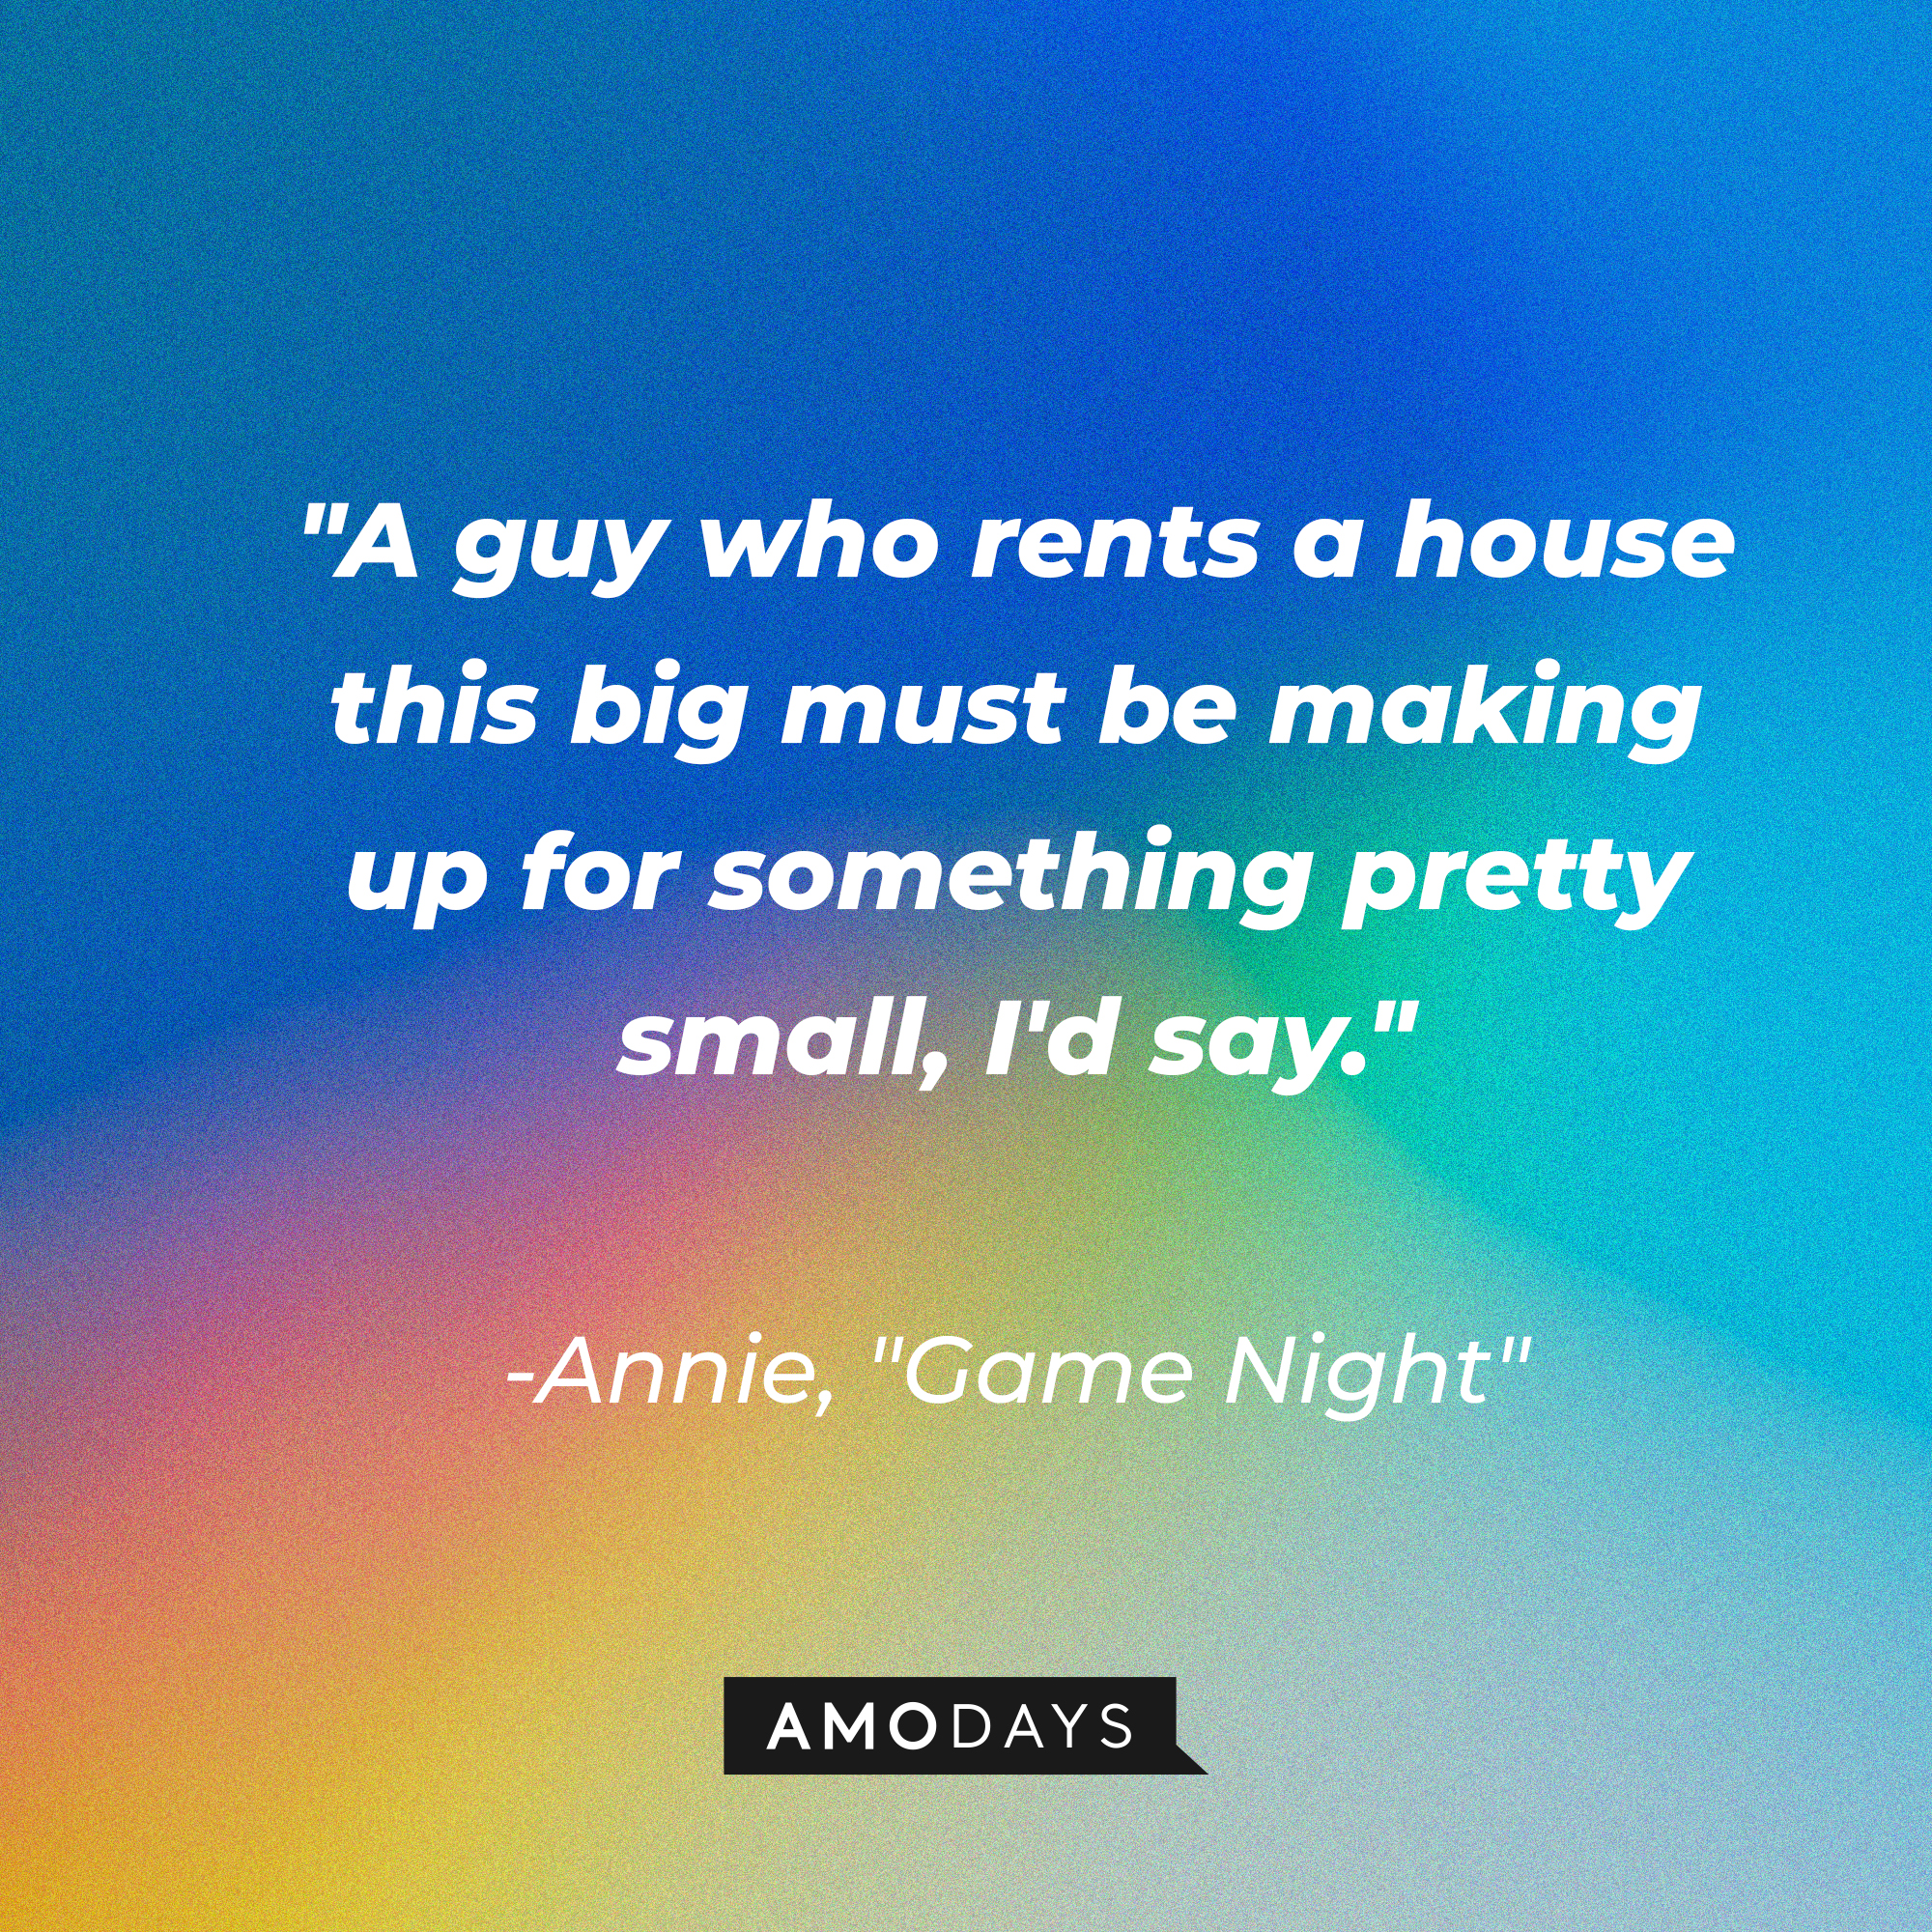 Annie's quote from “Game Night”: “A guy who rents a house this big must be making up for something pretty small, I'd say.” | Source: AmoDays